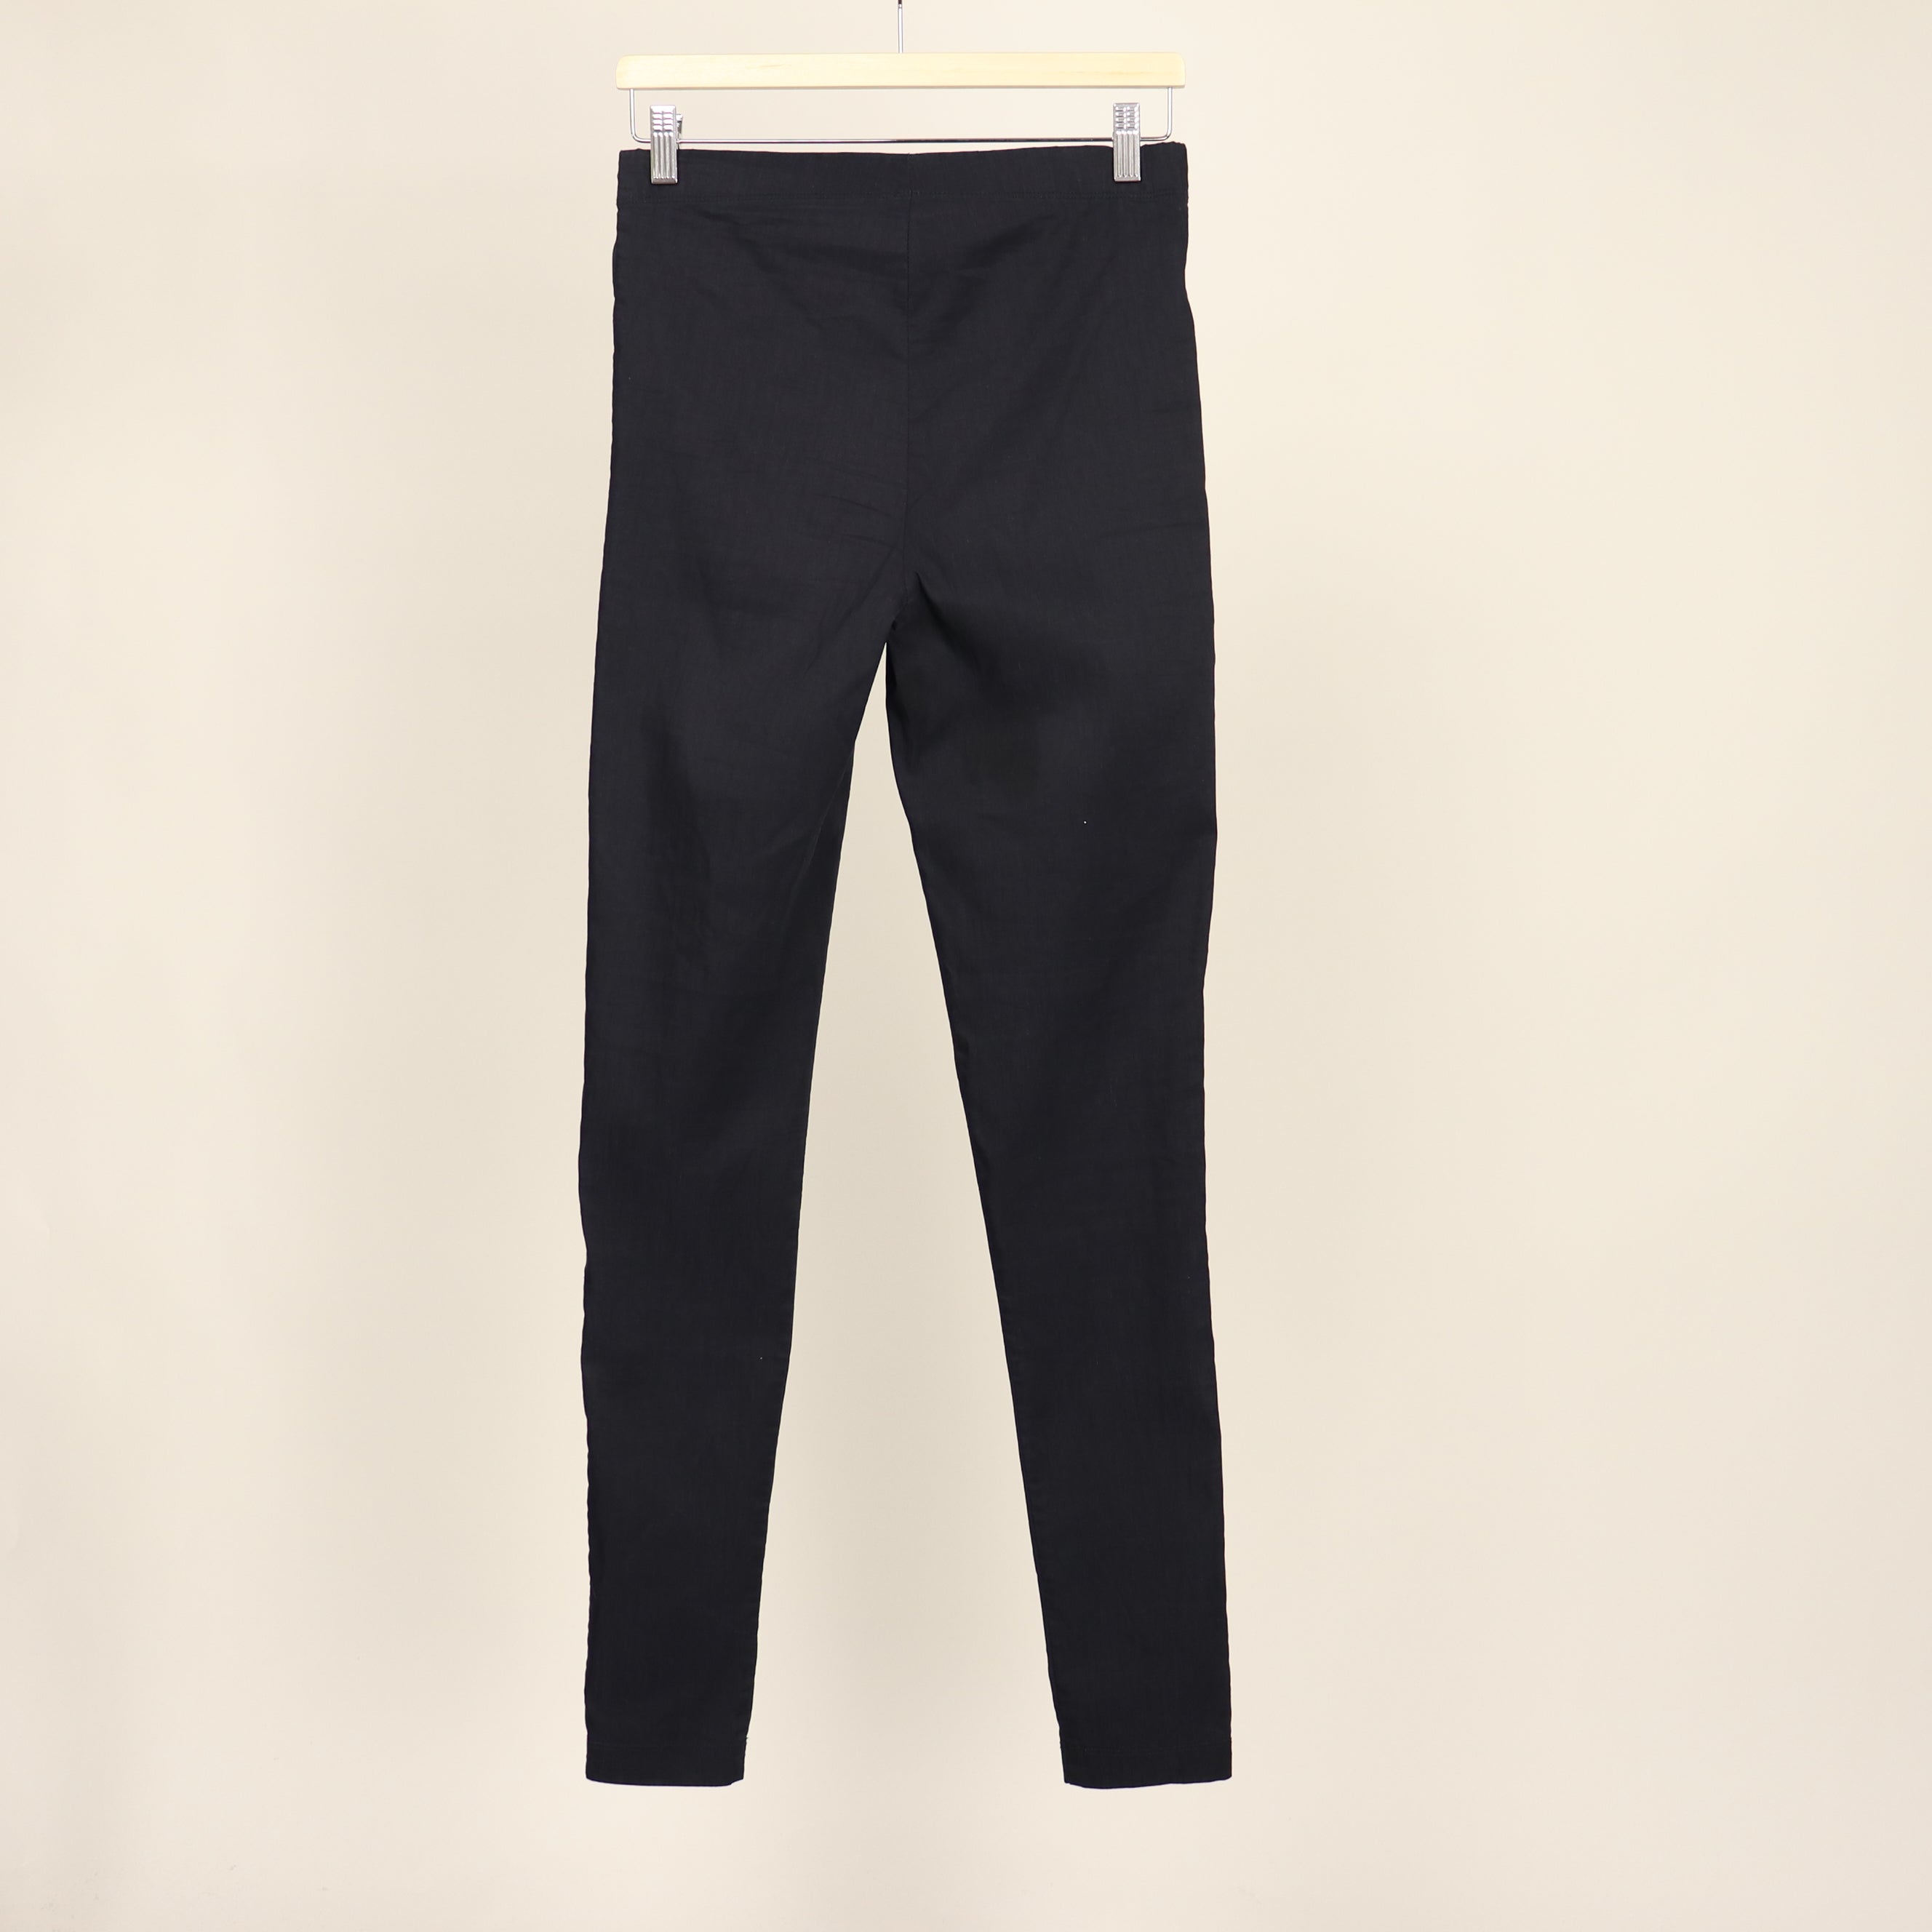 Trousers, Size 8